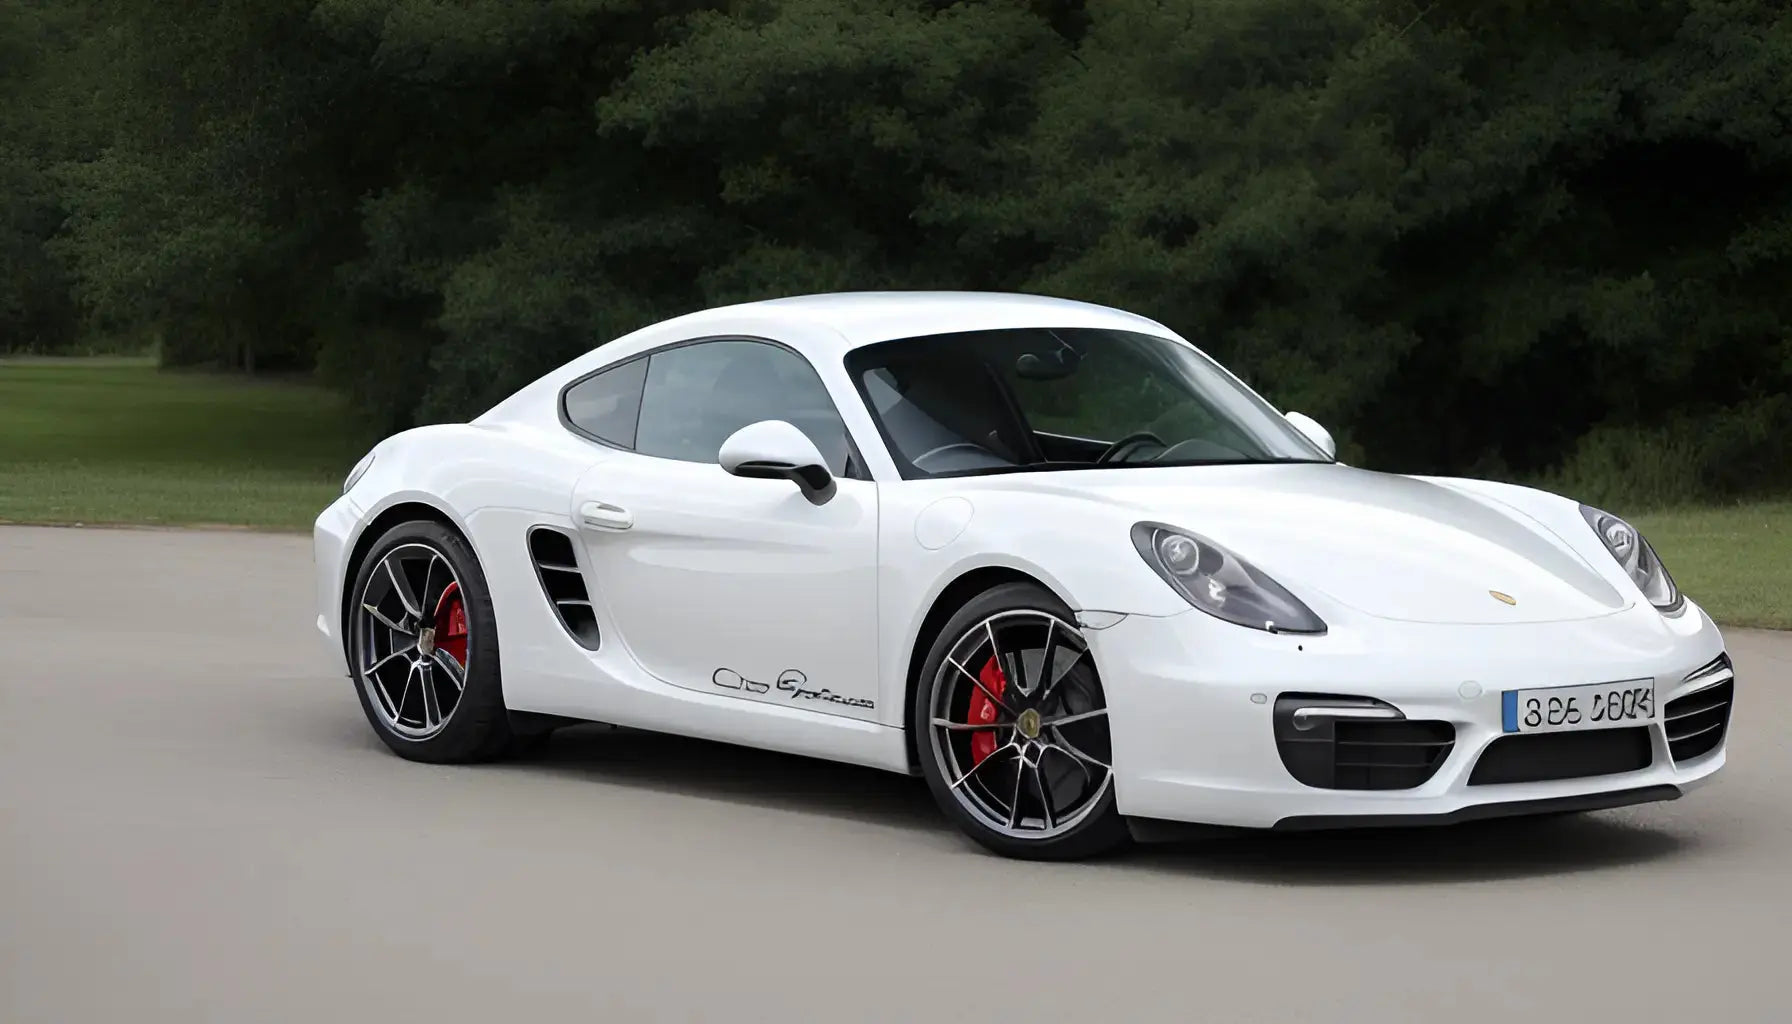 The Best Year for the Porsche Cayman - 